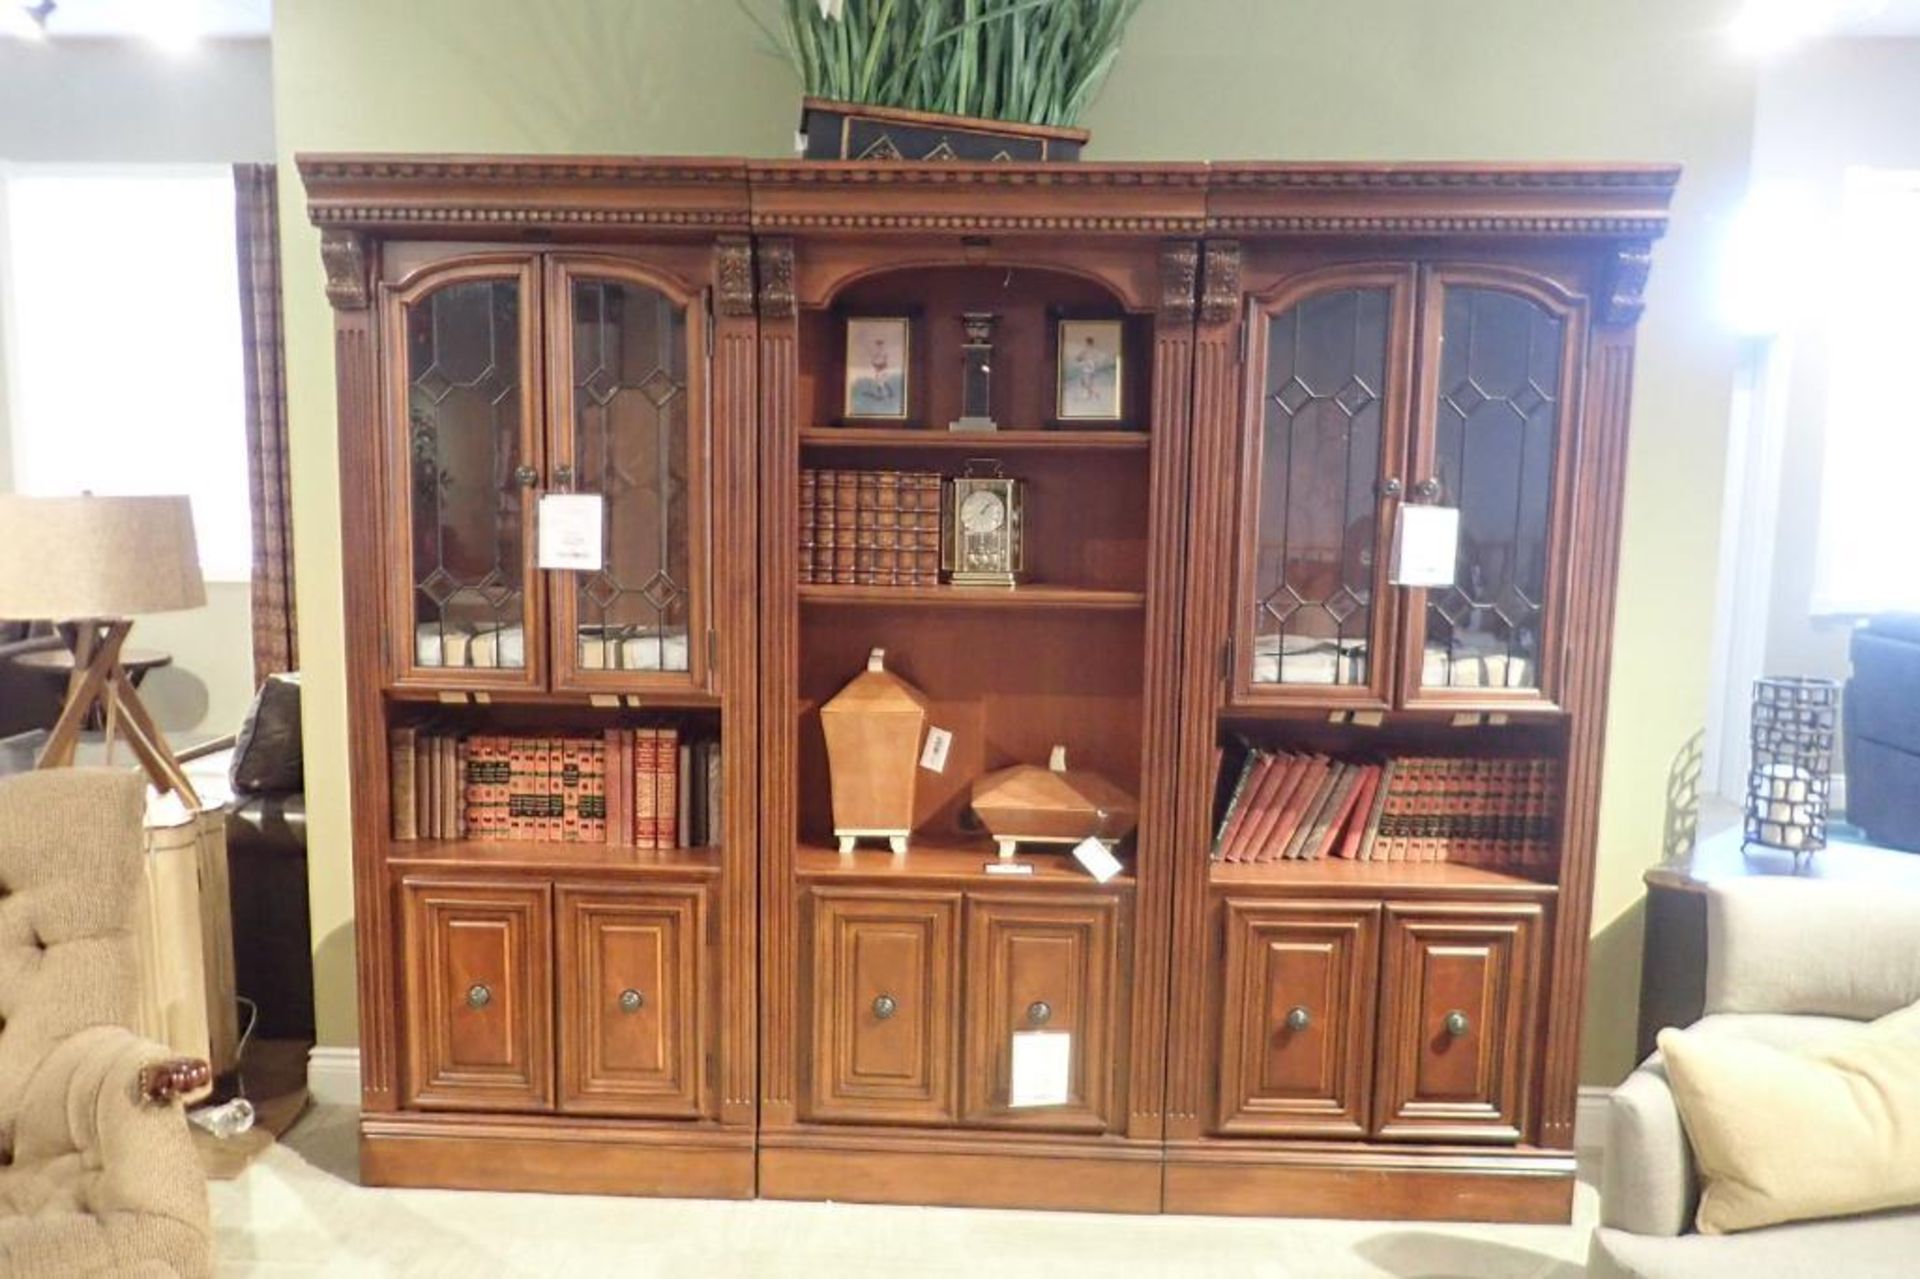 PHF 3-Piece Cabinet w/ Built-in Lights, (2) 32"x80" Leaded Glass w/Bevelled Accent Door Cabinets and